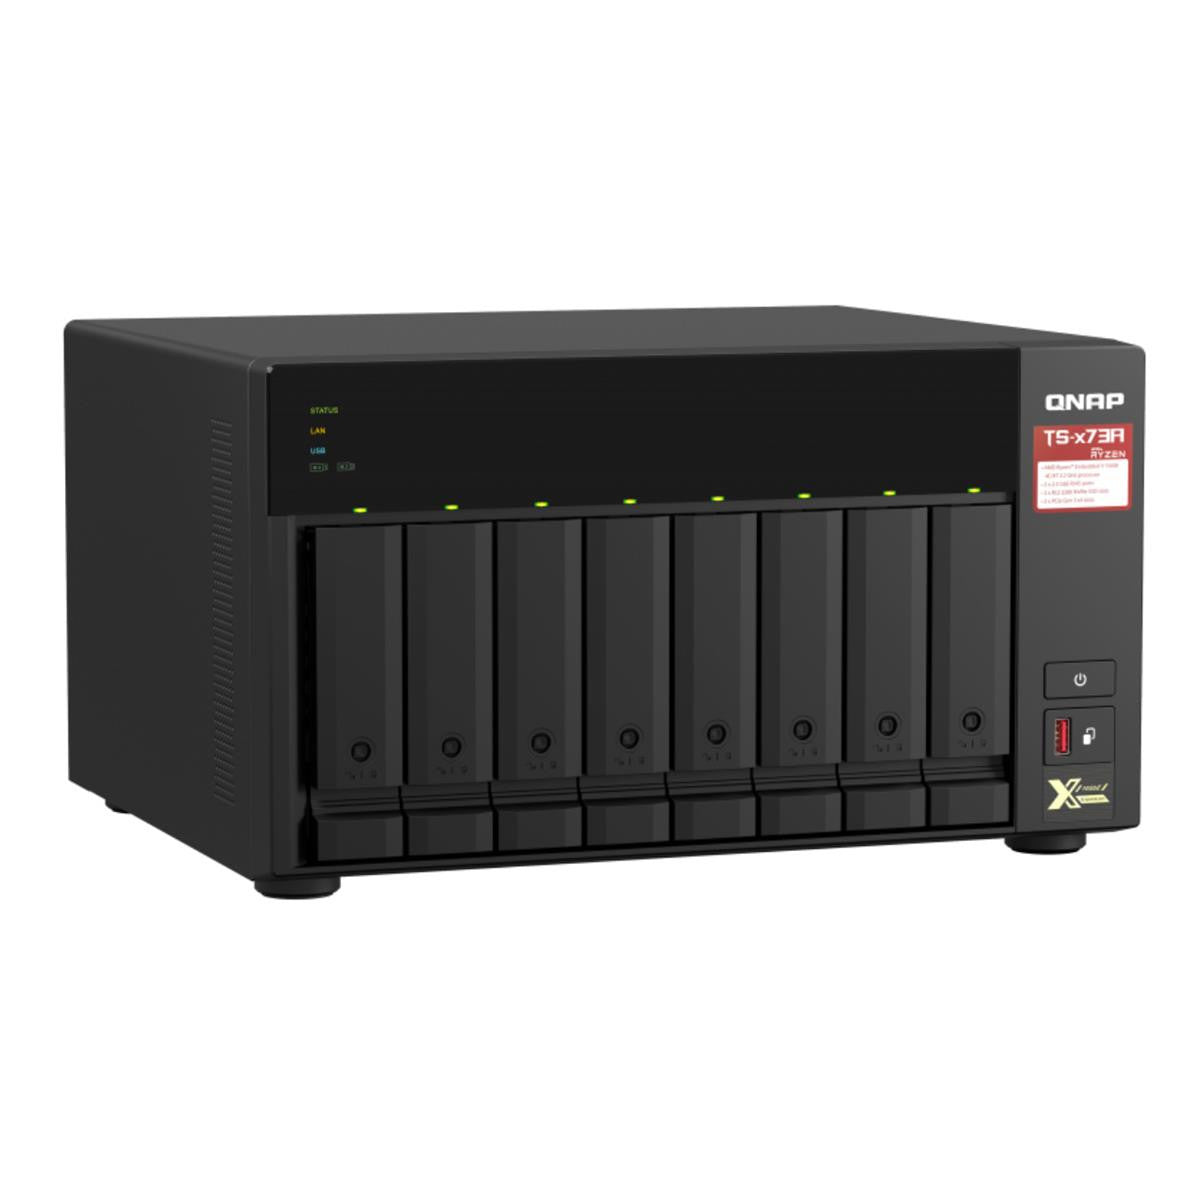 QNAP TS-873A 8-BAY NAS with 8GB DDR4 RAM and 80TB (8x10TB) Seagate Ironwolf NAS Drives Fully Assembled and Tested